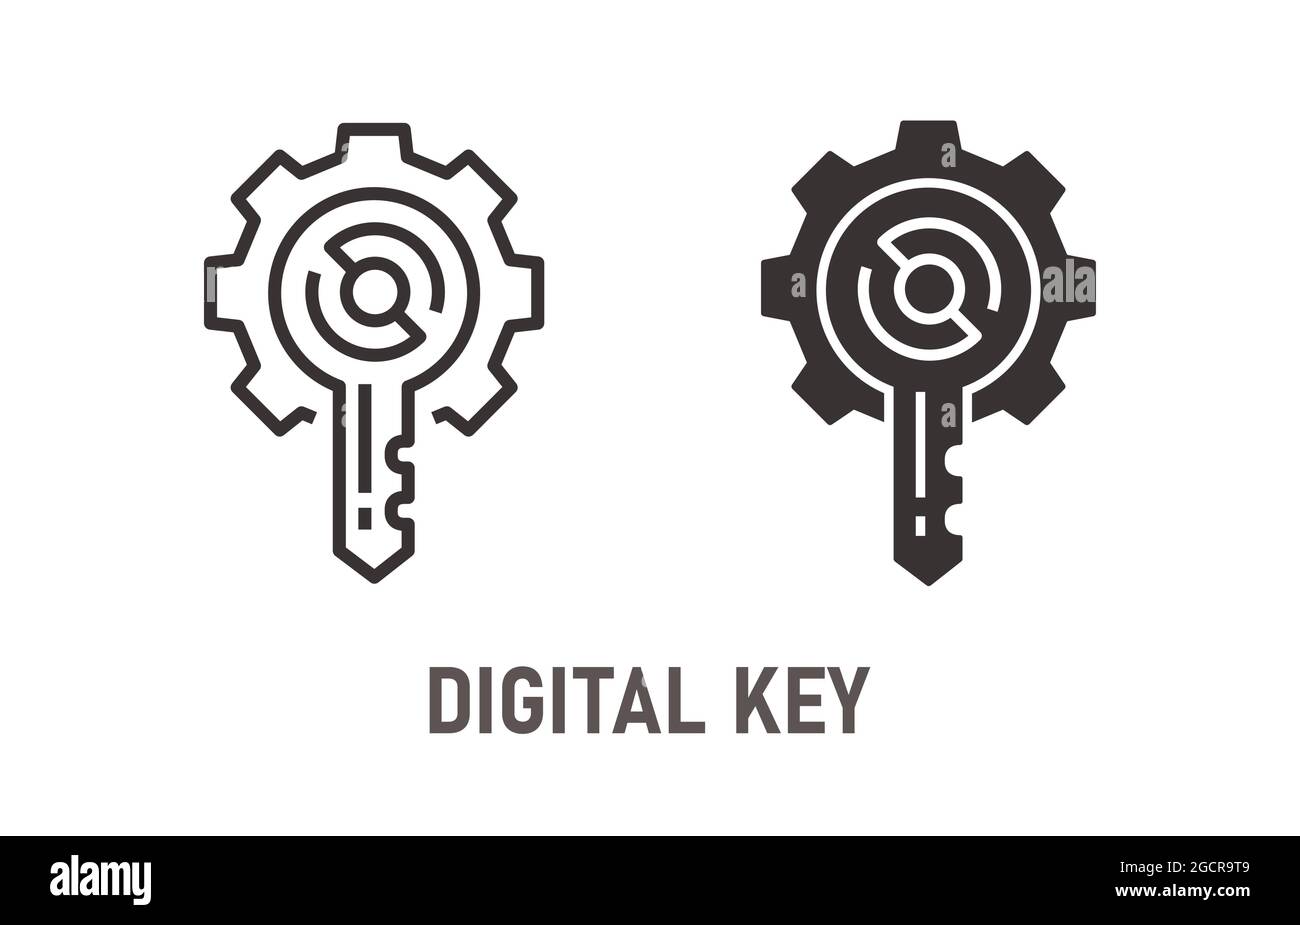 Digital key icon. Vector illustration isolated on white. Stock Vector